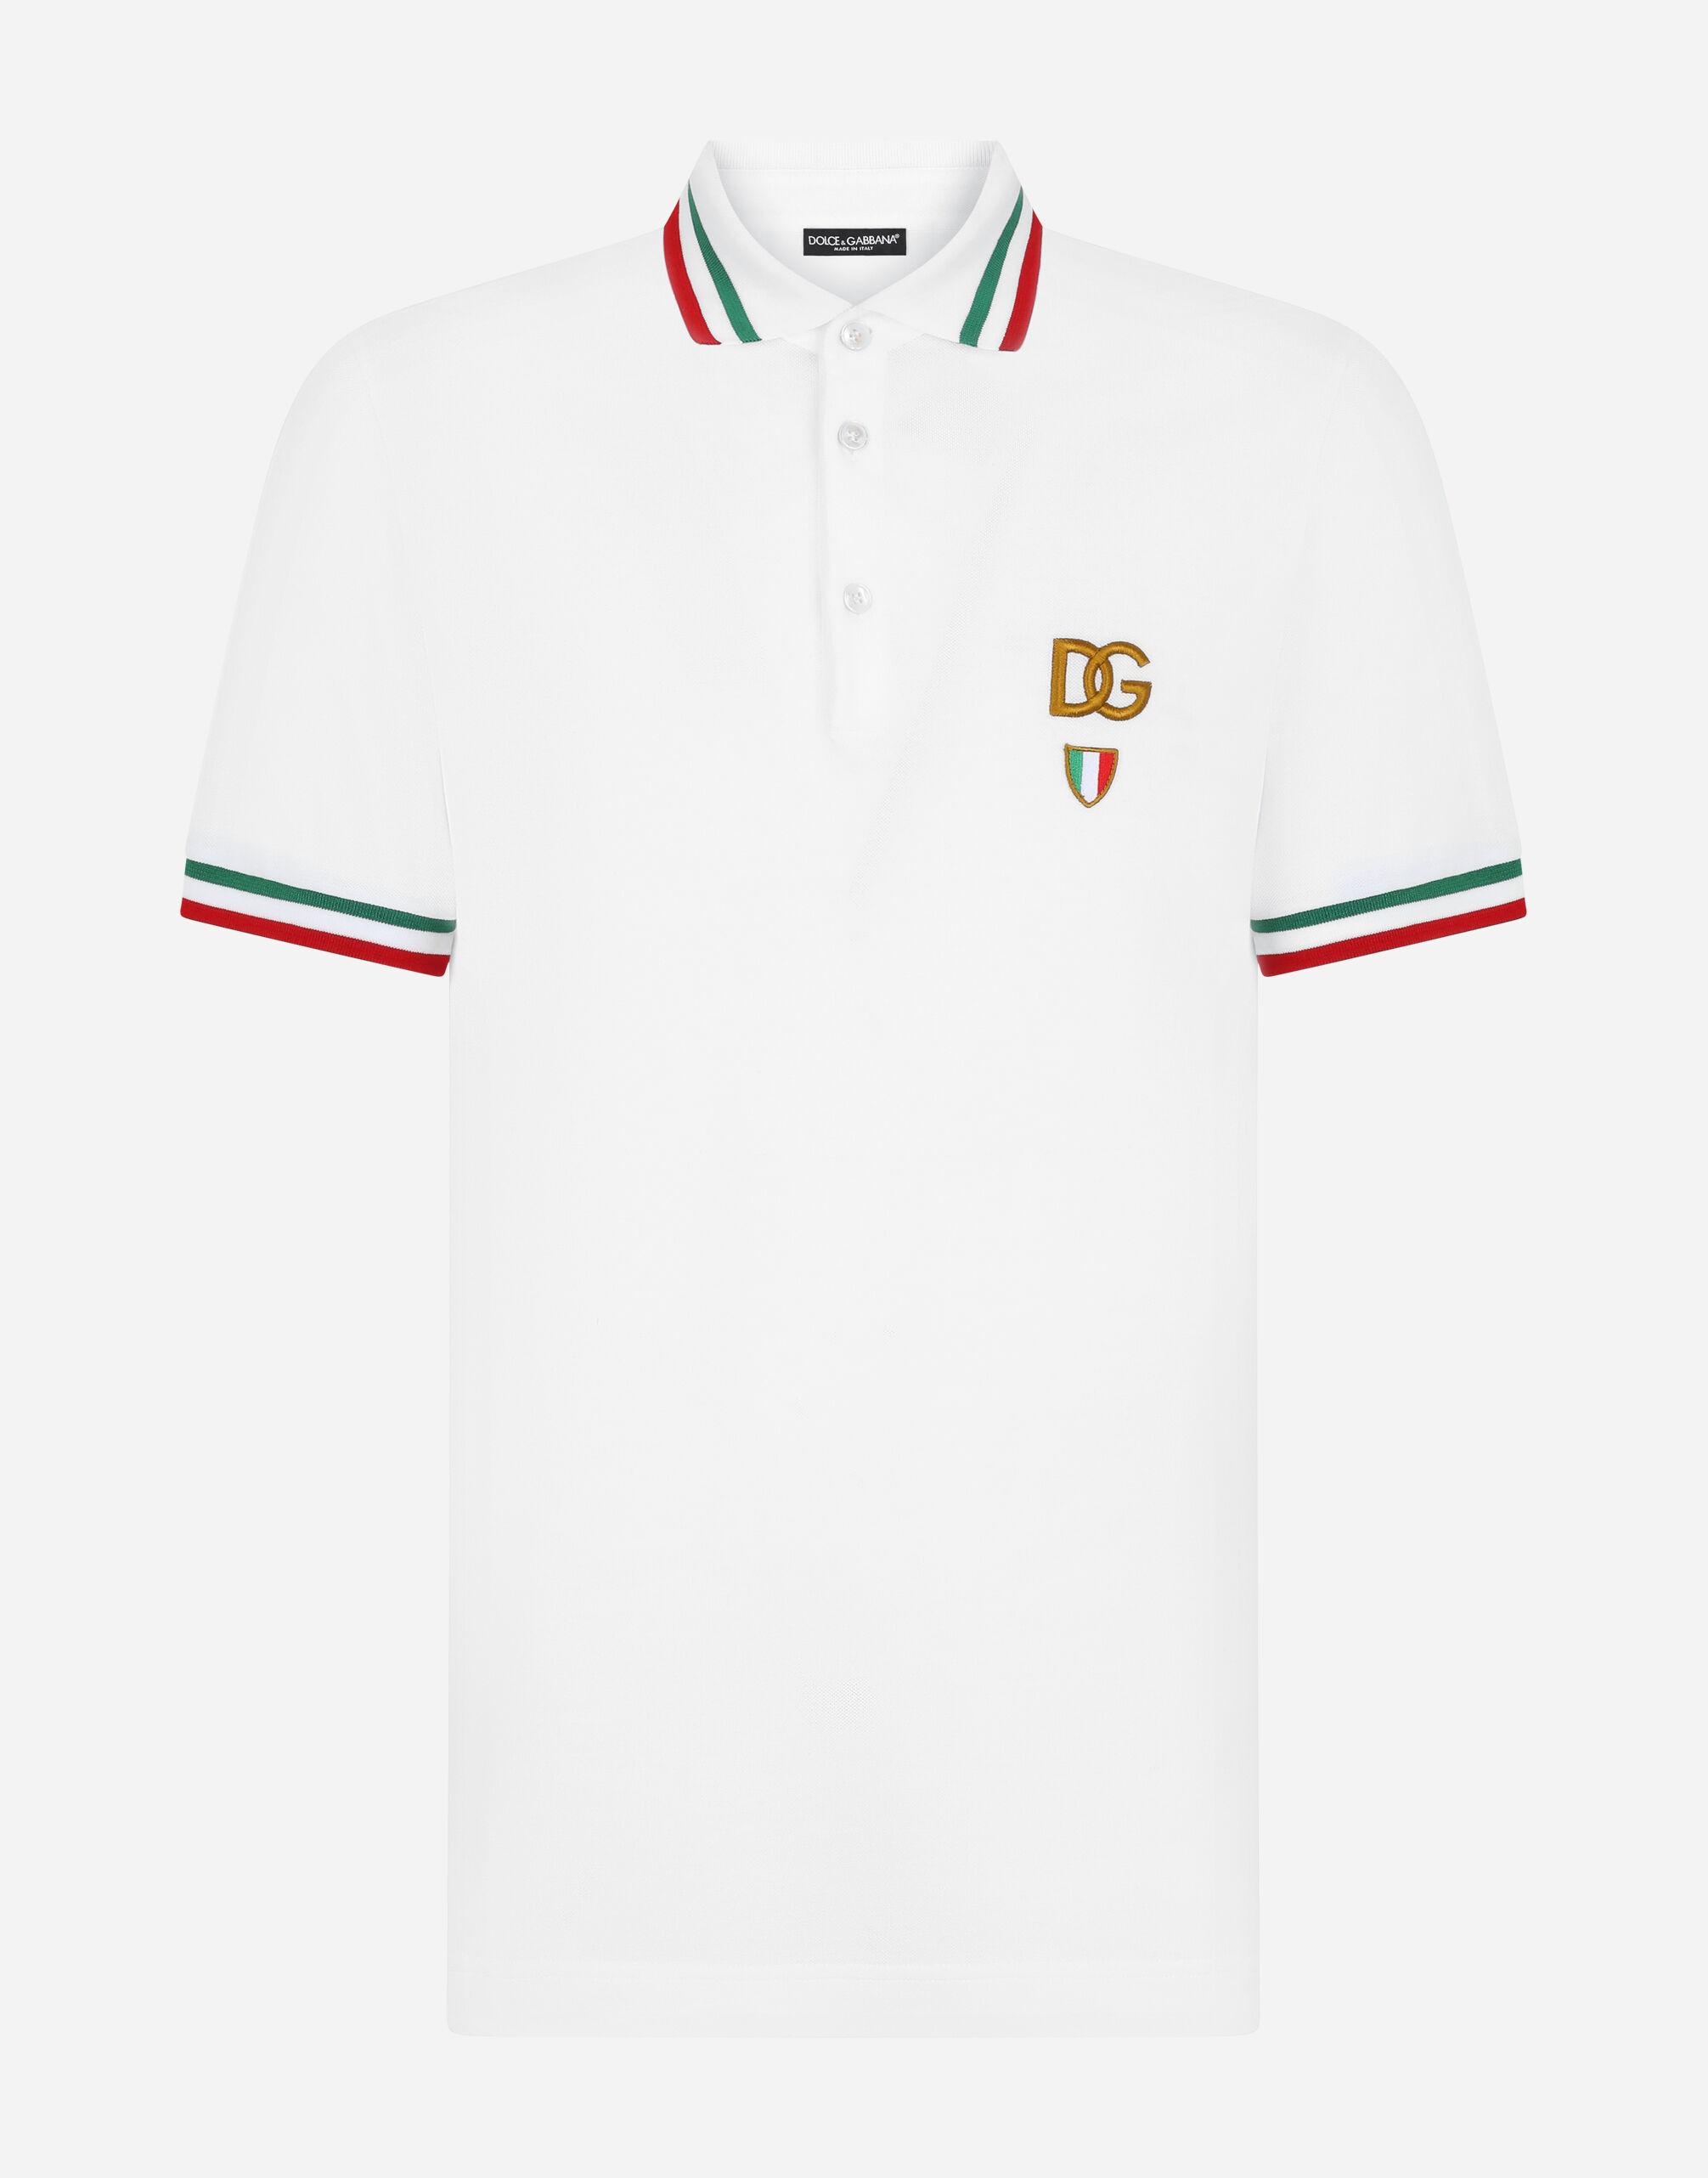 Dolce & Gabbana Cotton Piqué Polo Shirt With Dg Patch in White for Men Mens Clothing T-shirts Polo shirts 